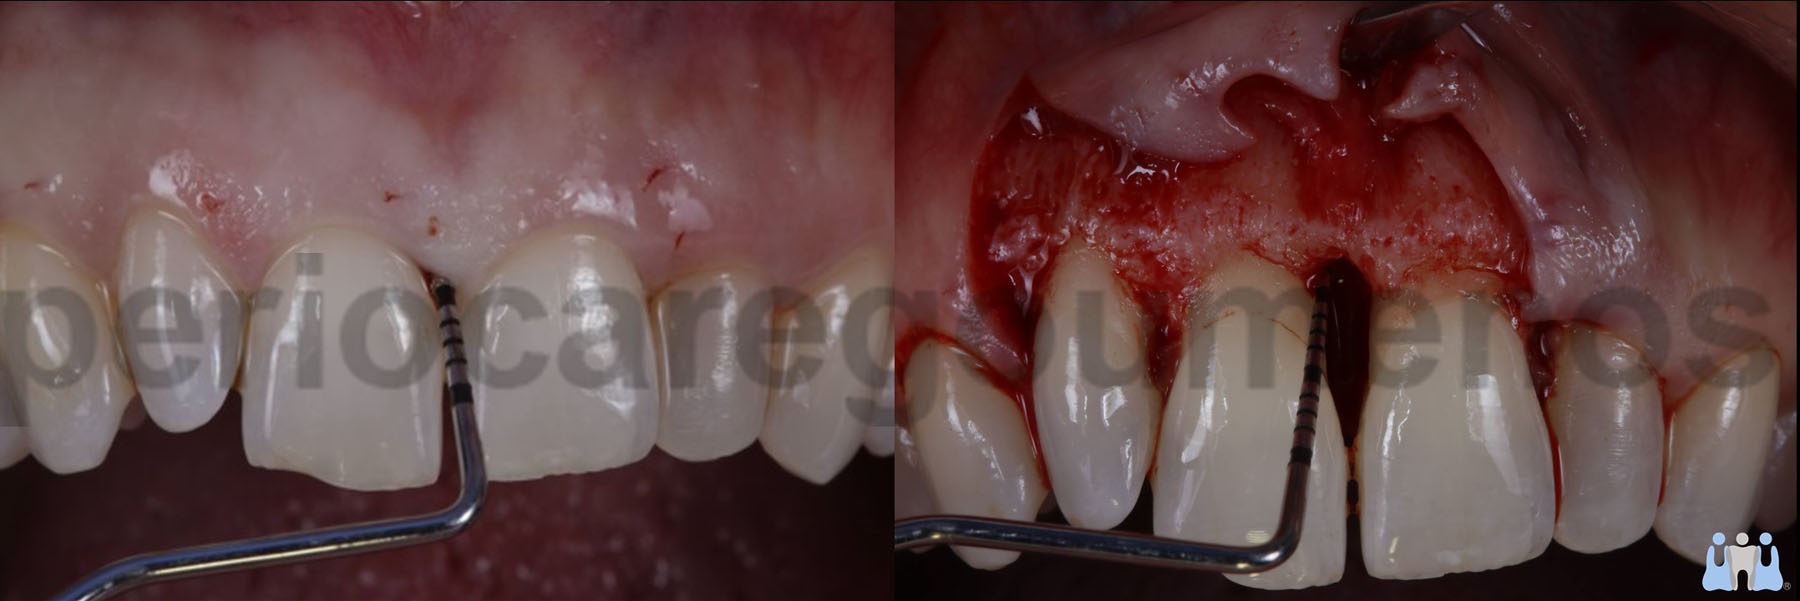 Surgical treatment of an infrabony lesion on tooth #11